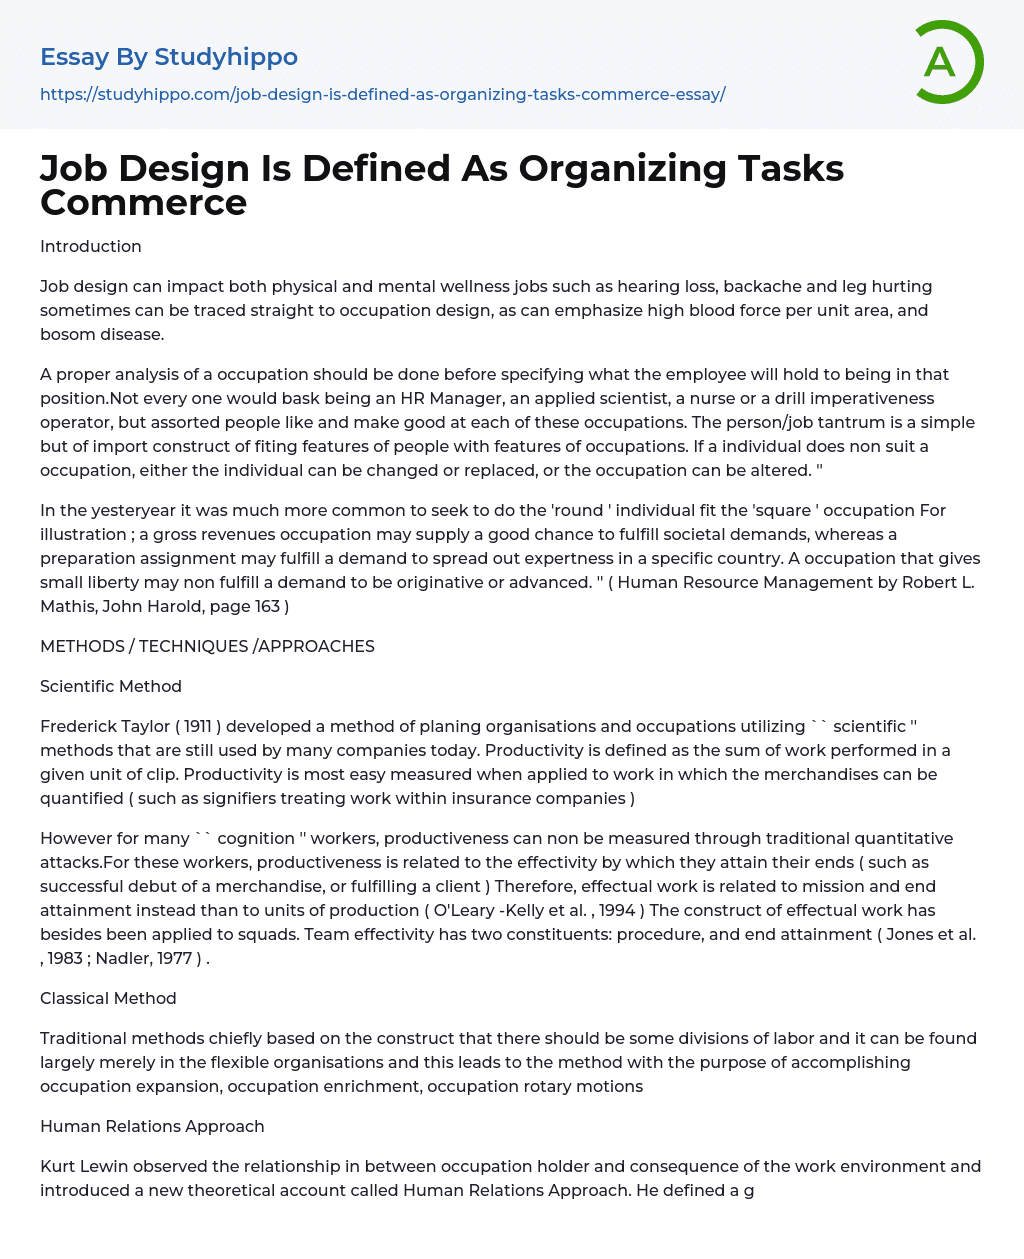 Job Design Is Defined As Organizing Tasks Commerce Essay Example